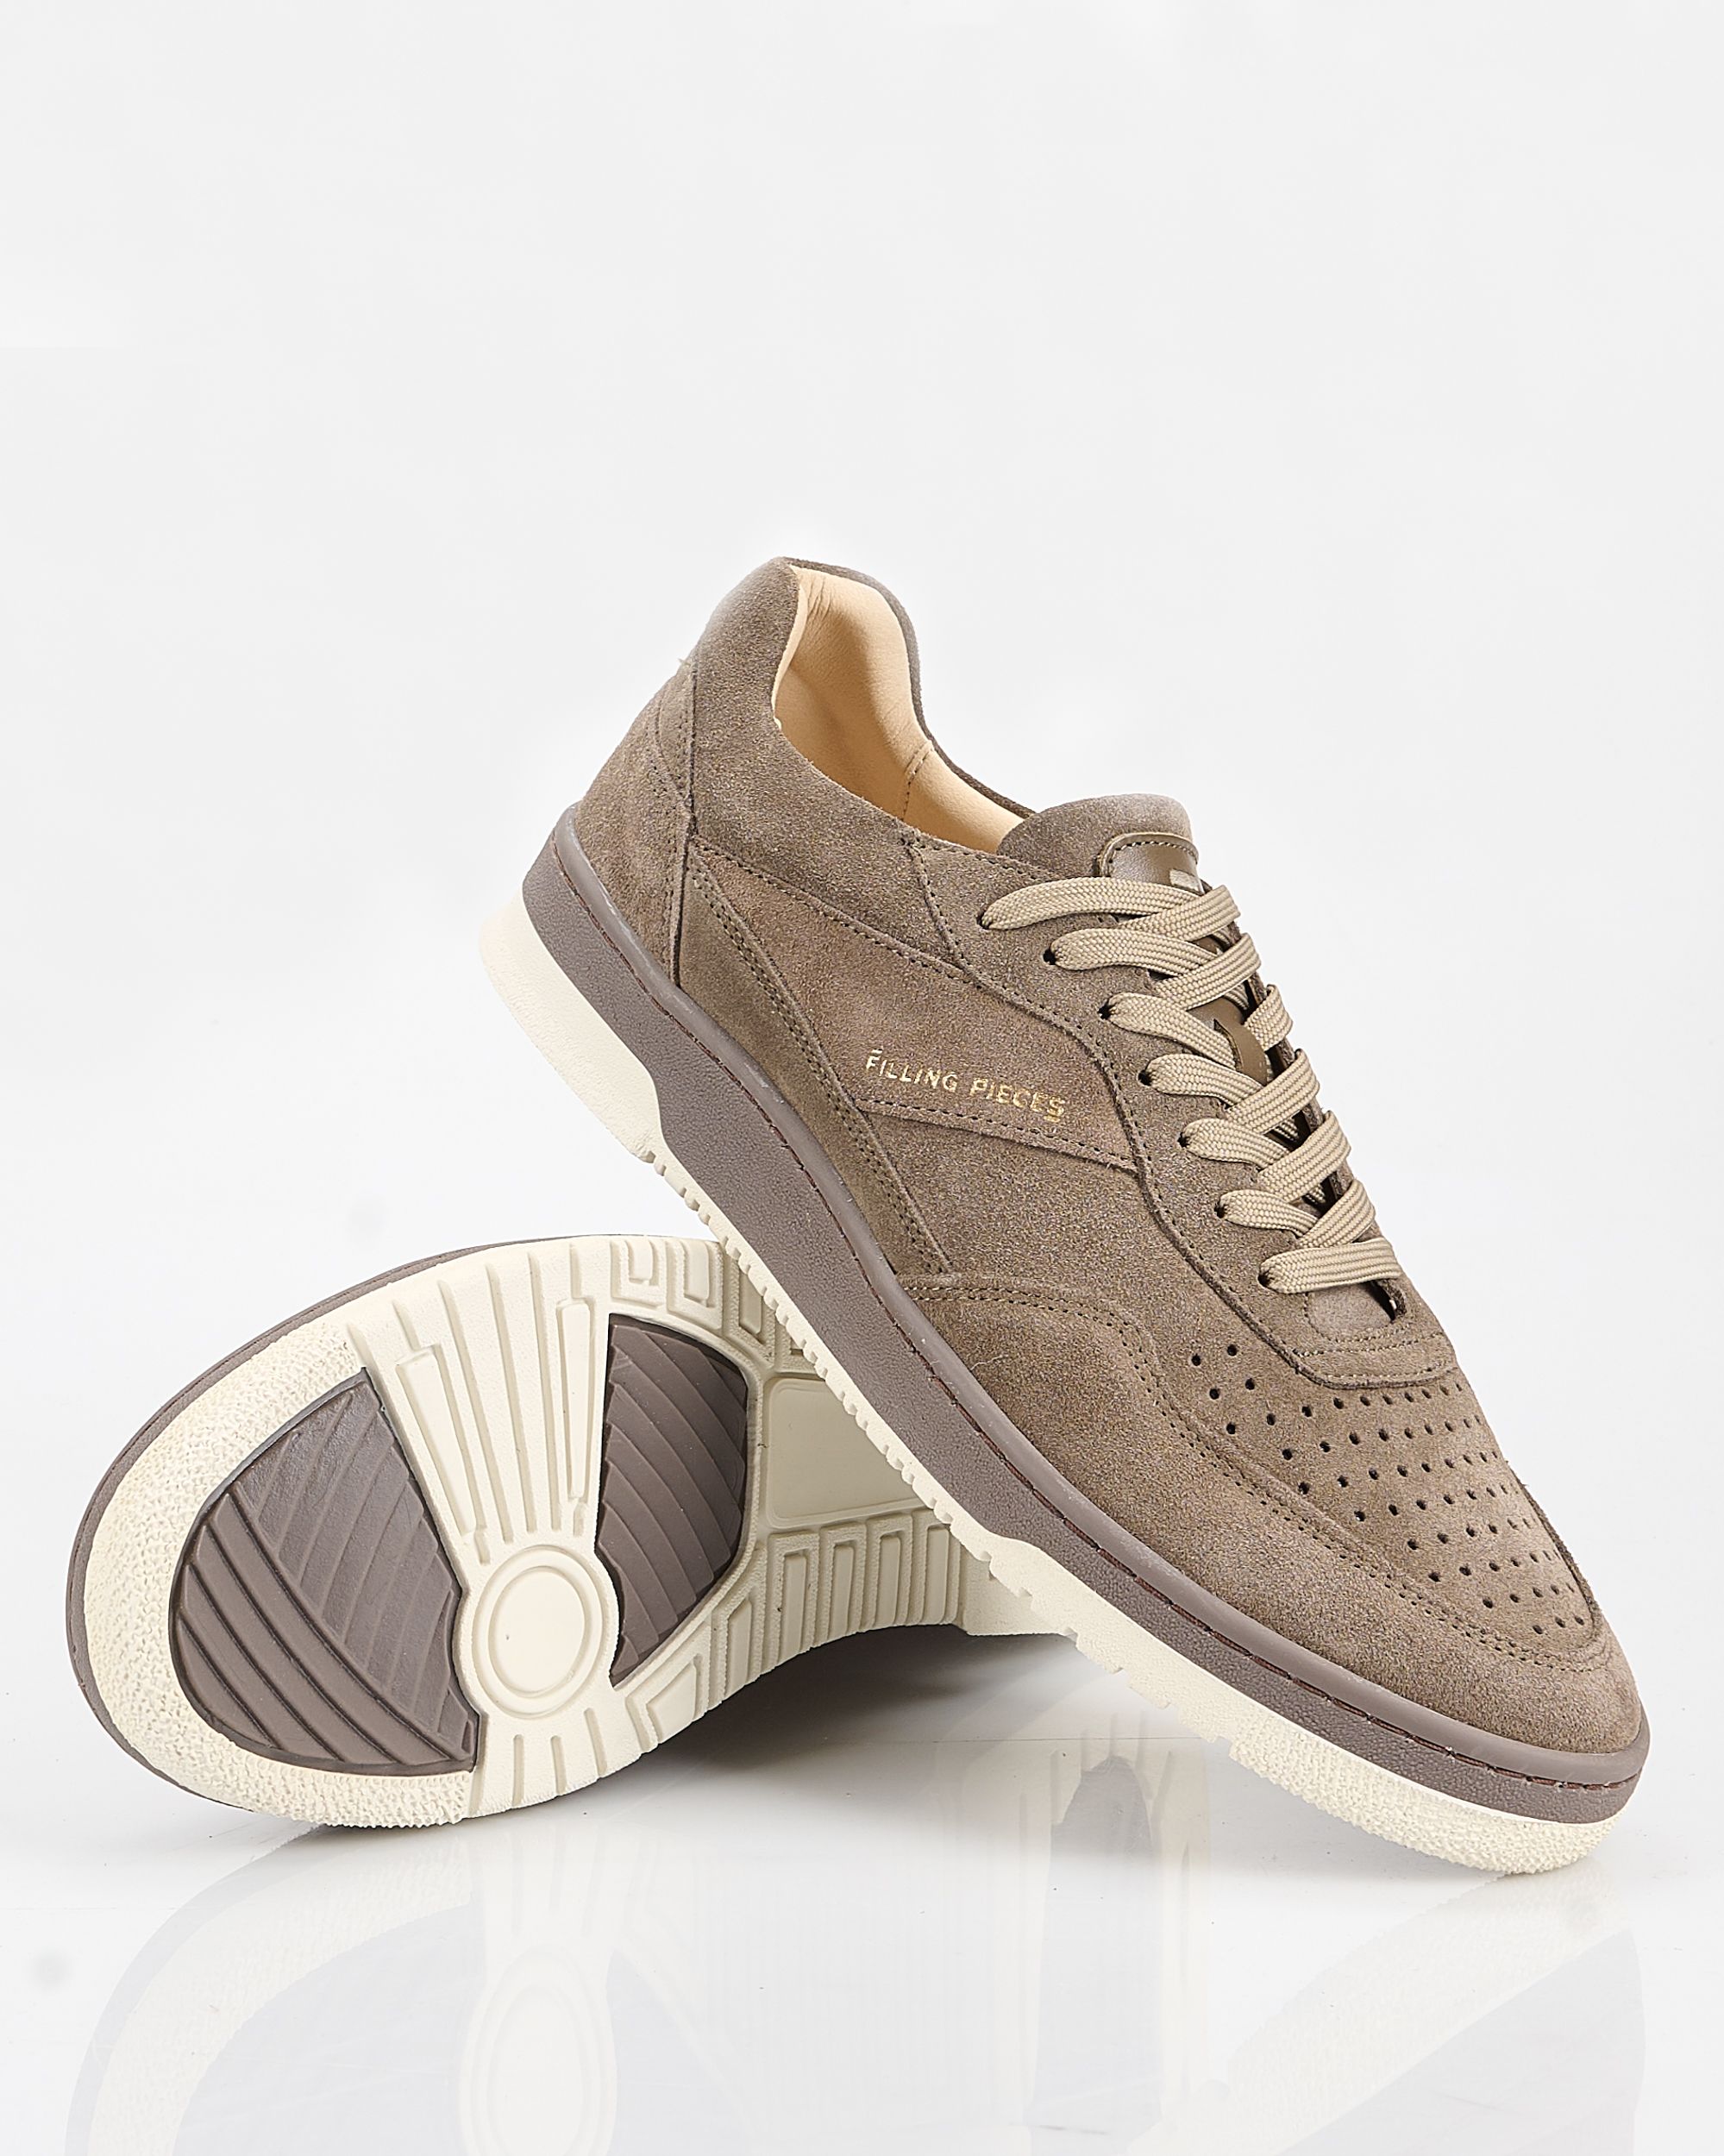 Filling Pieces Ace Suede Taupe Sneakers Bruin 093686-001-40